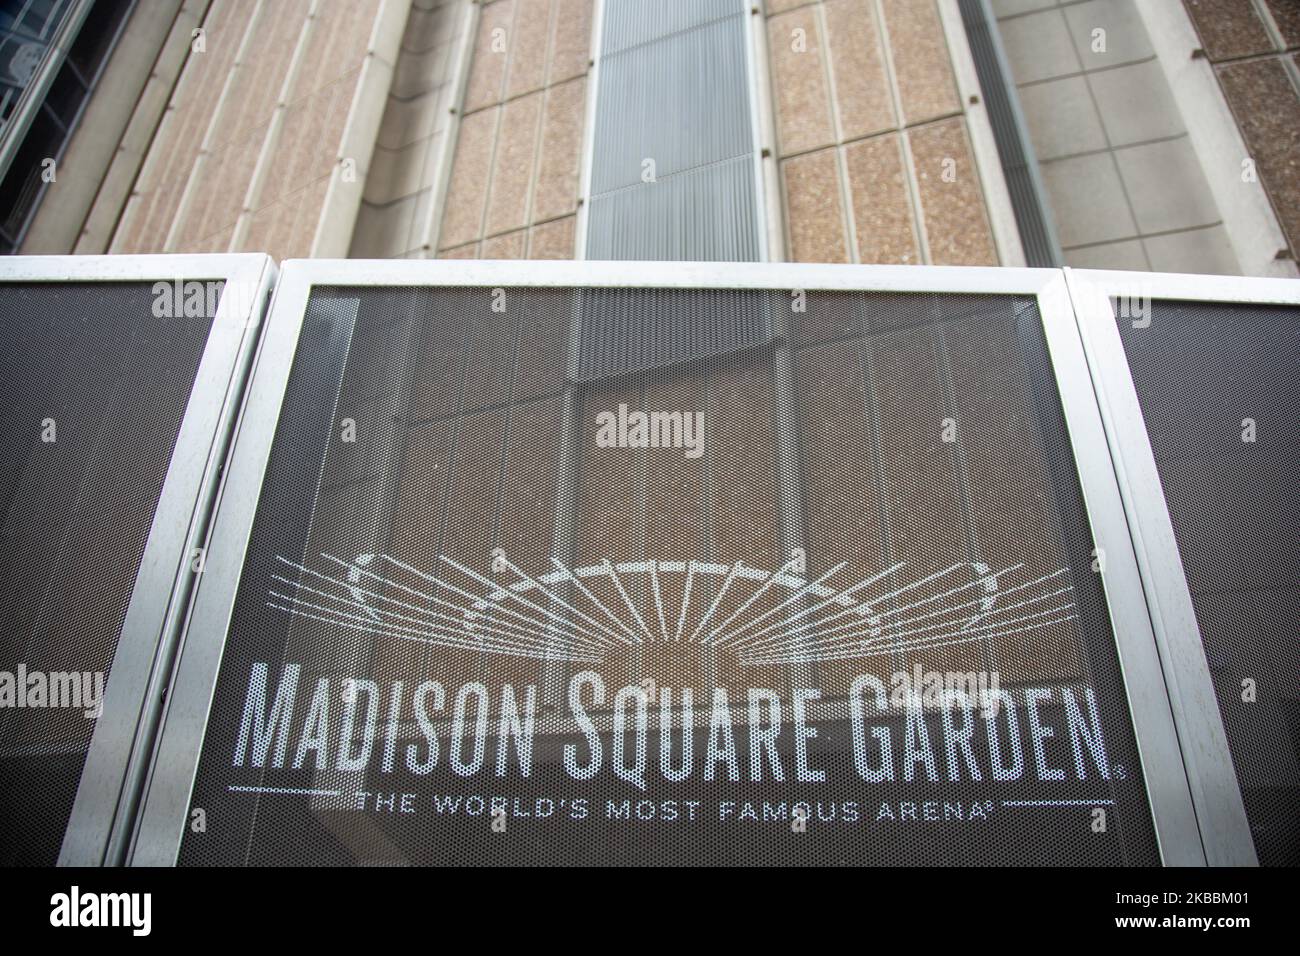 Madison Square Garden MSG, a multipurpose sports and concert arena located above metro Penn / Pennsylvania Station in the Chelsea neighborhood of Manhattan between 7th and 8th avenue, New York City NYC in the United States. Nowadays it is home to the New York Rangers of the National Hockey League - NHL and the New York Knicks of the National Basketball Association - NBA (Photo by Nicolas Economou/NurPhoto) Stock Photo